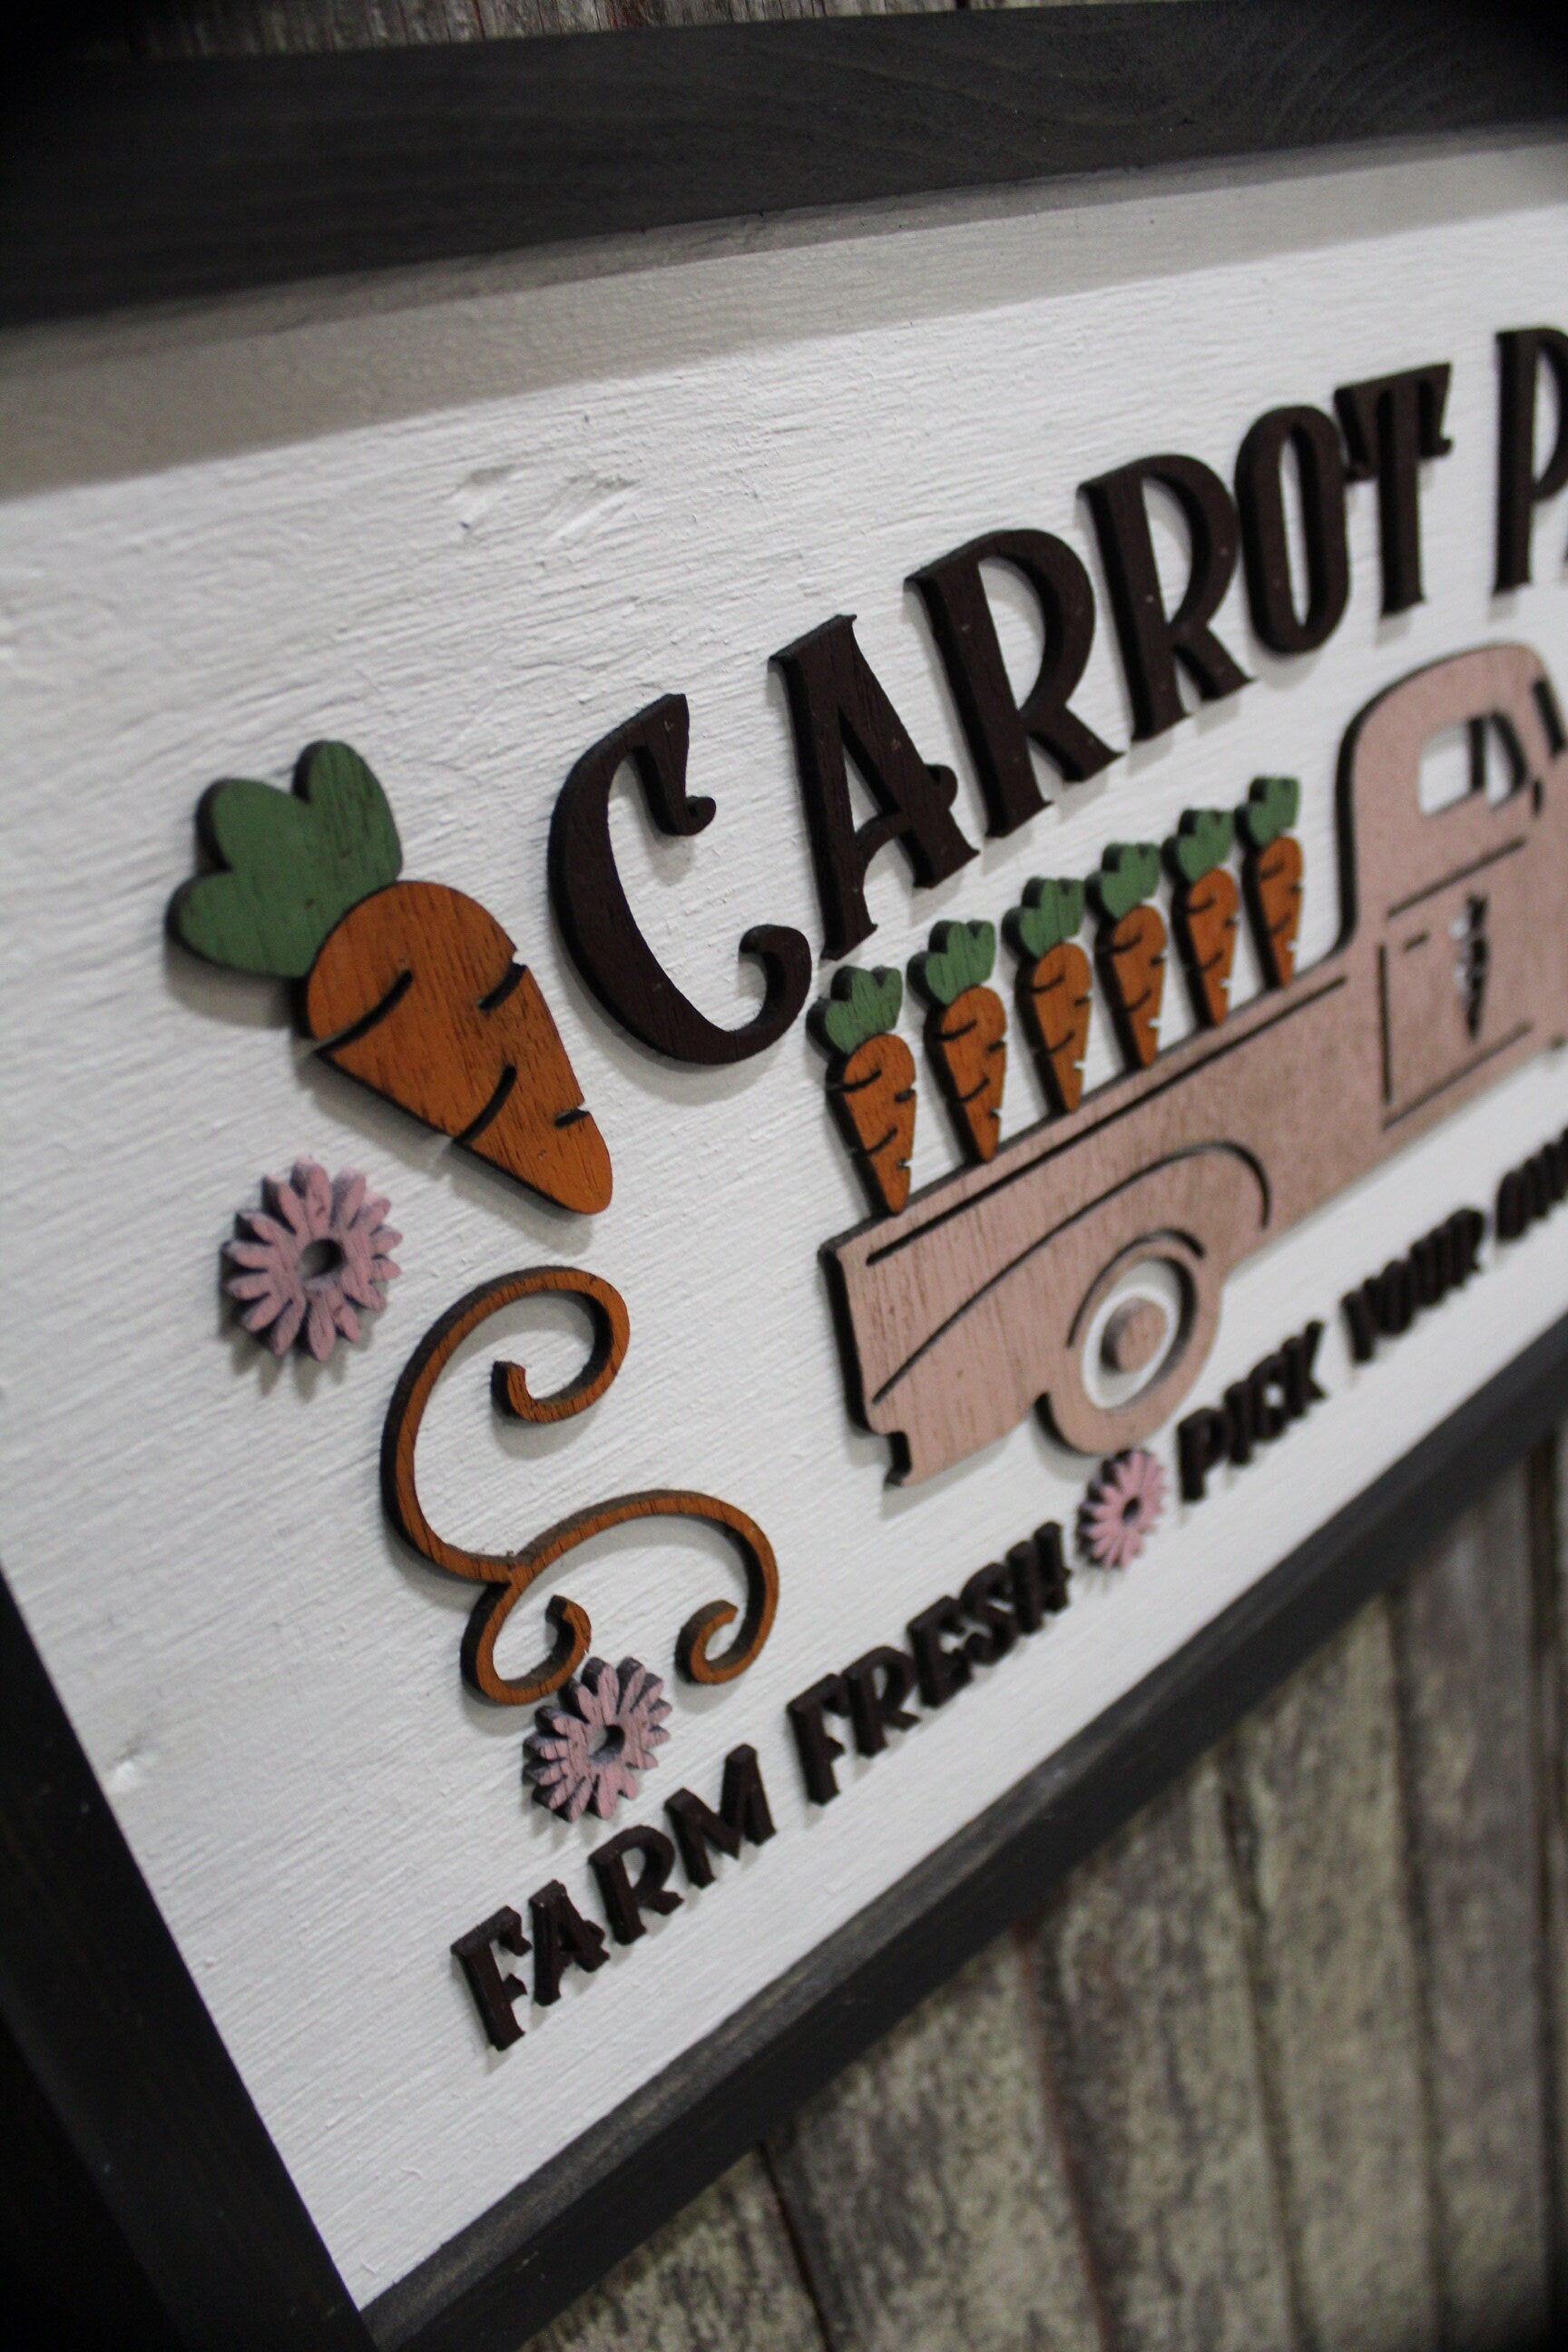 Carrot Patch 3D Wood Sign Vintage Truck Spring Decoration Farm Fresh Pick Your Own Organic Country Primitive Wall Hanging Rustic Decor